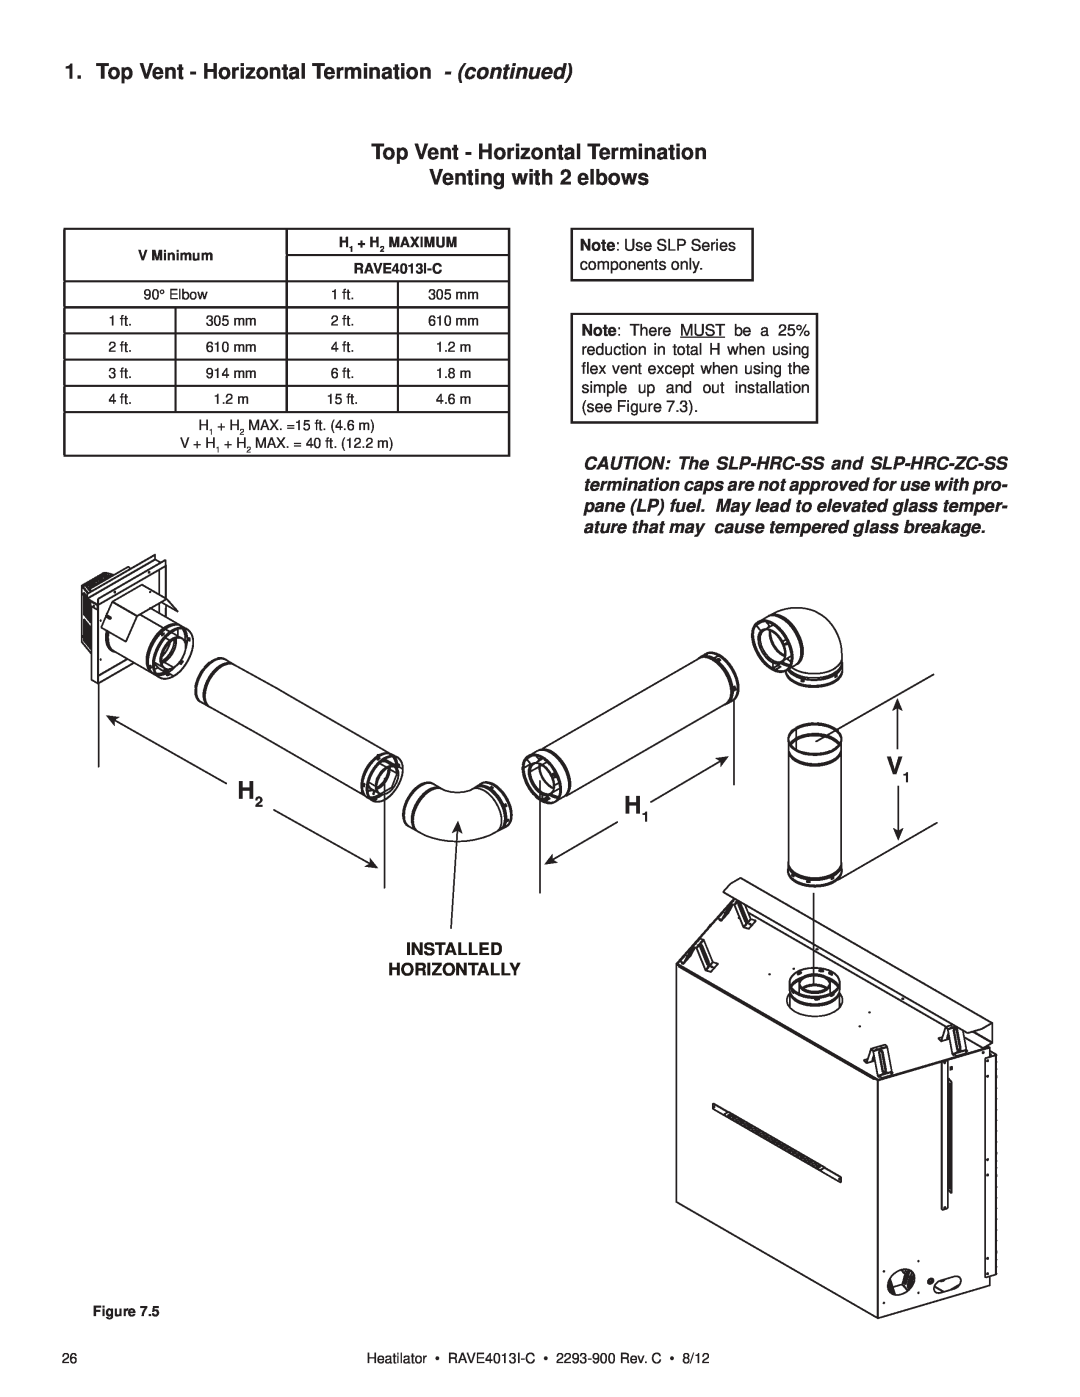 Heatiator Rave4013i-c Top Vent - Horizontal Termination - continued, Venting with 2 elbows, Installed Horizontally, 305 mm 